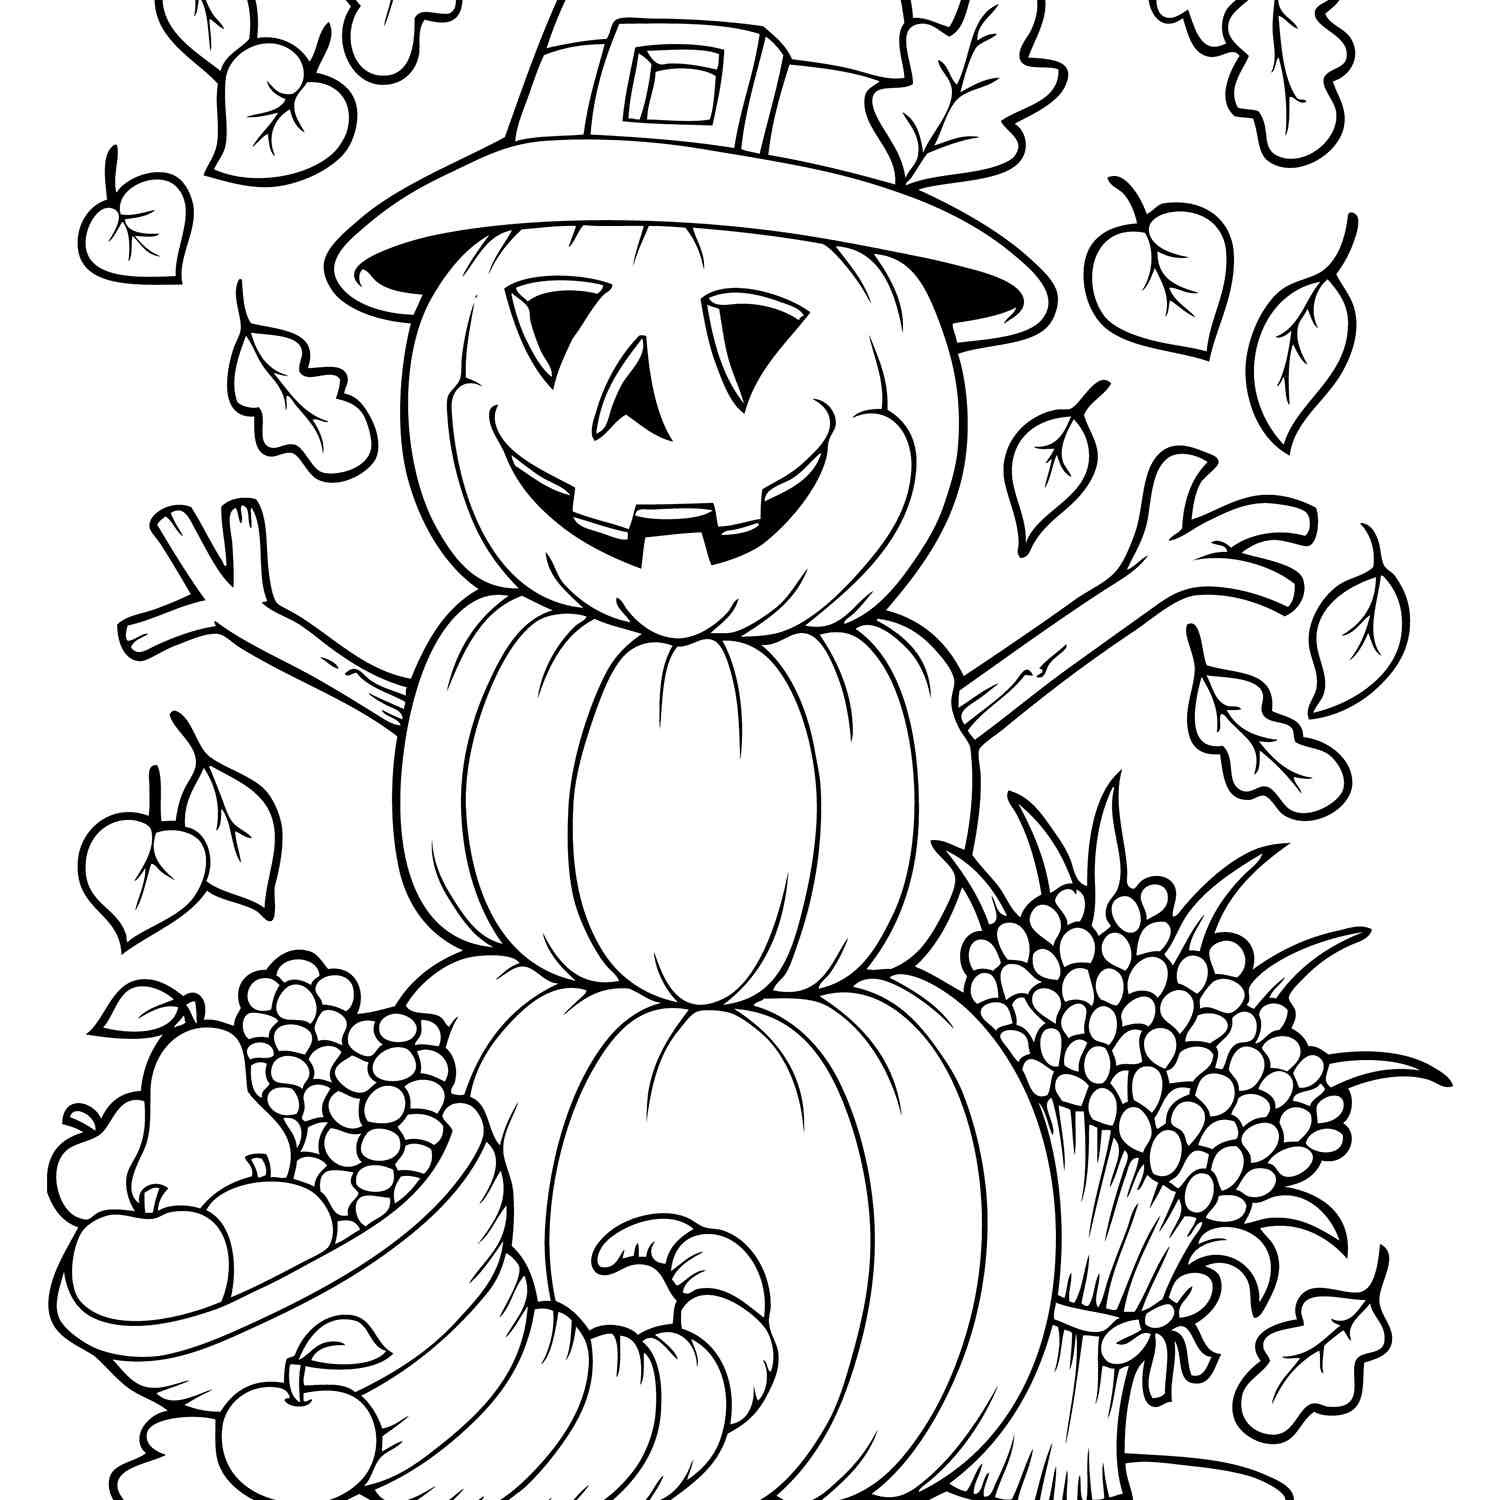 Free Printable Fall Coloring Sheets
 Free Autumn and Fall Coloring Pages